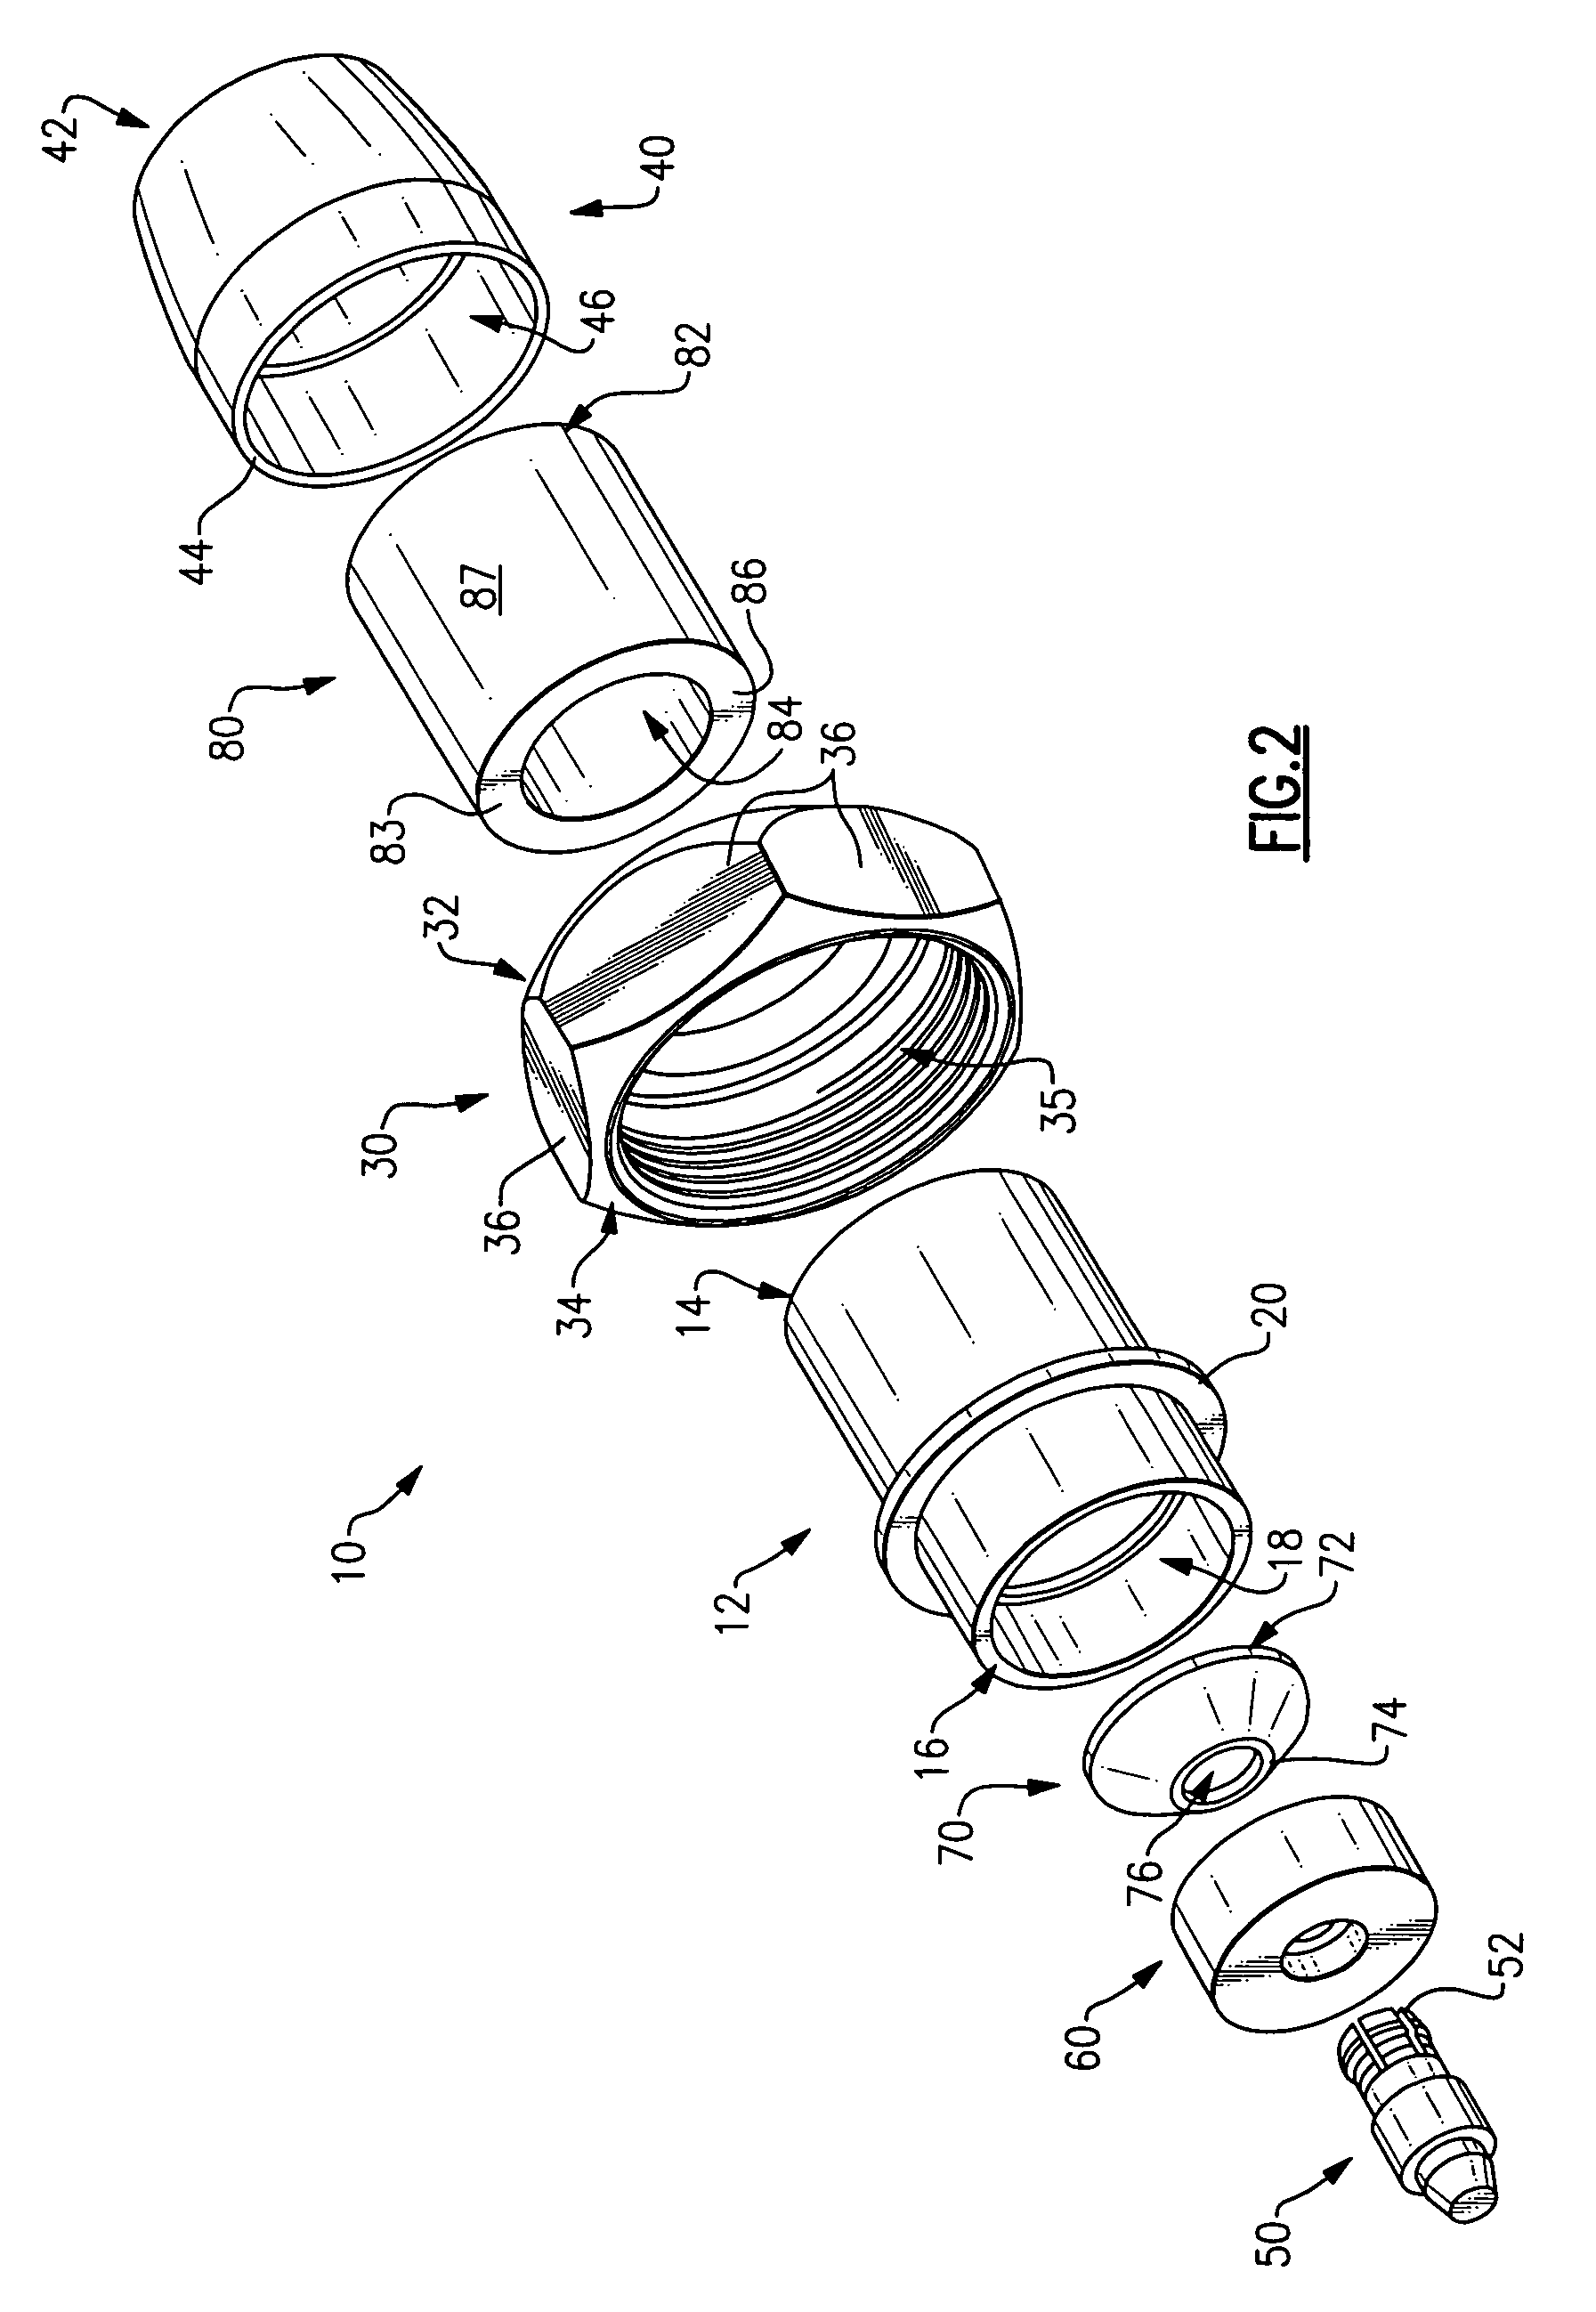 Compact compression connector with flexible clamp for corrugated coaxial cable